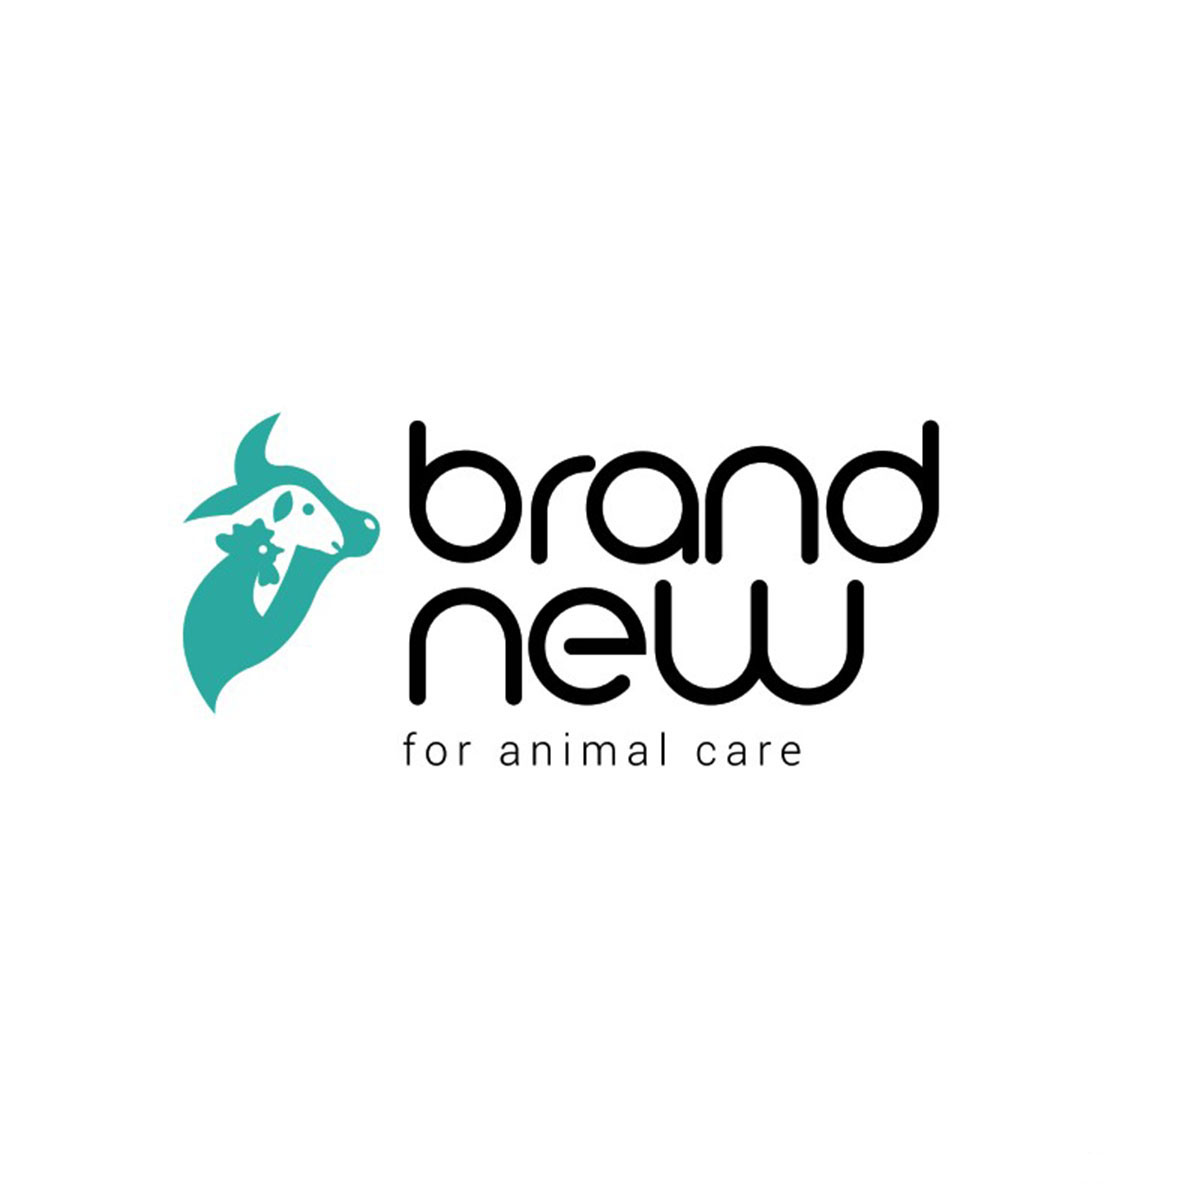 Brand new for animal care